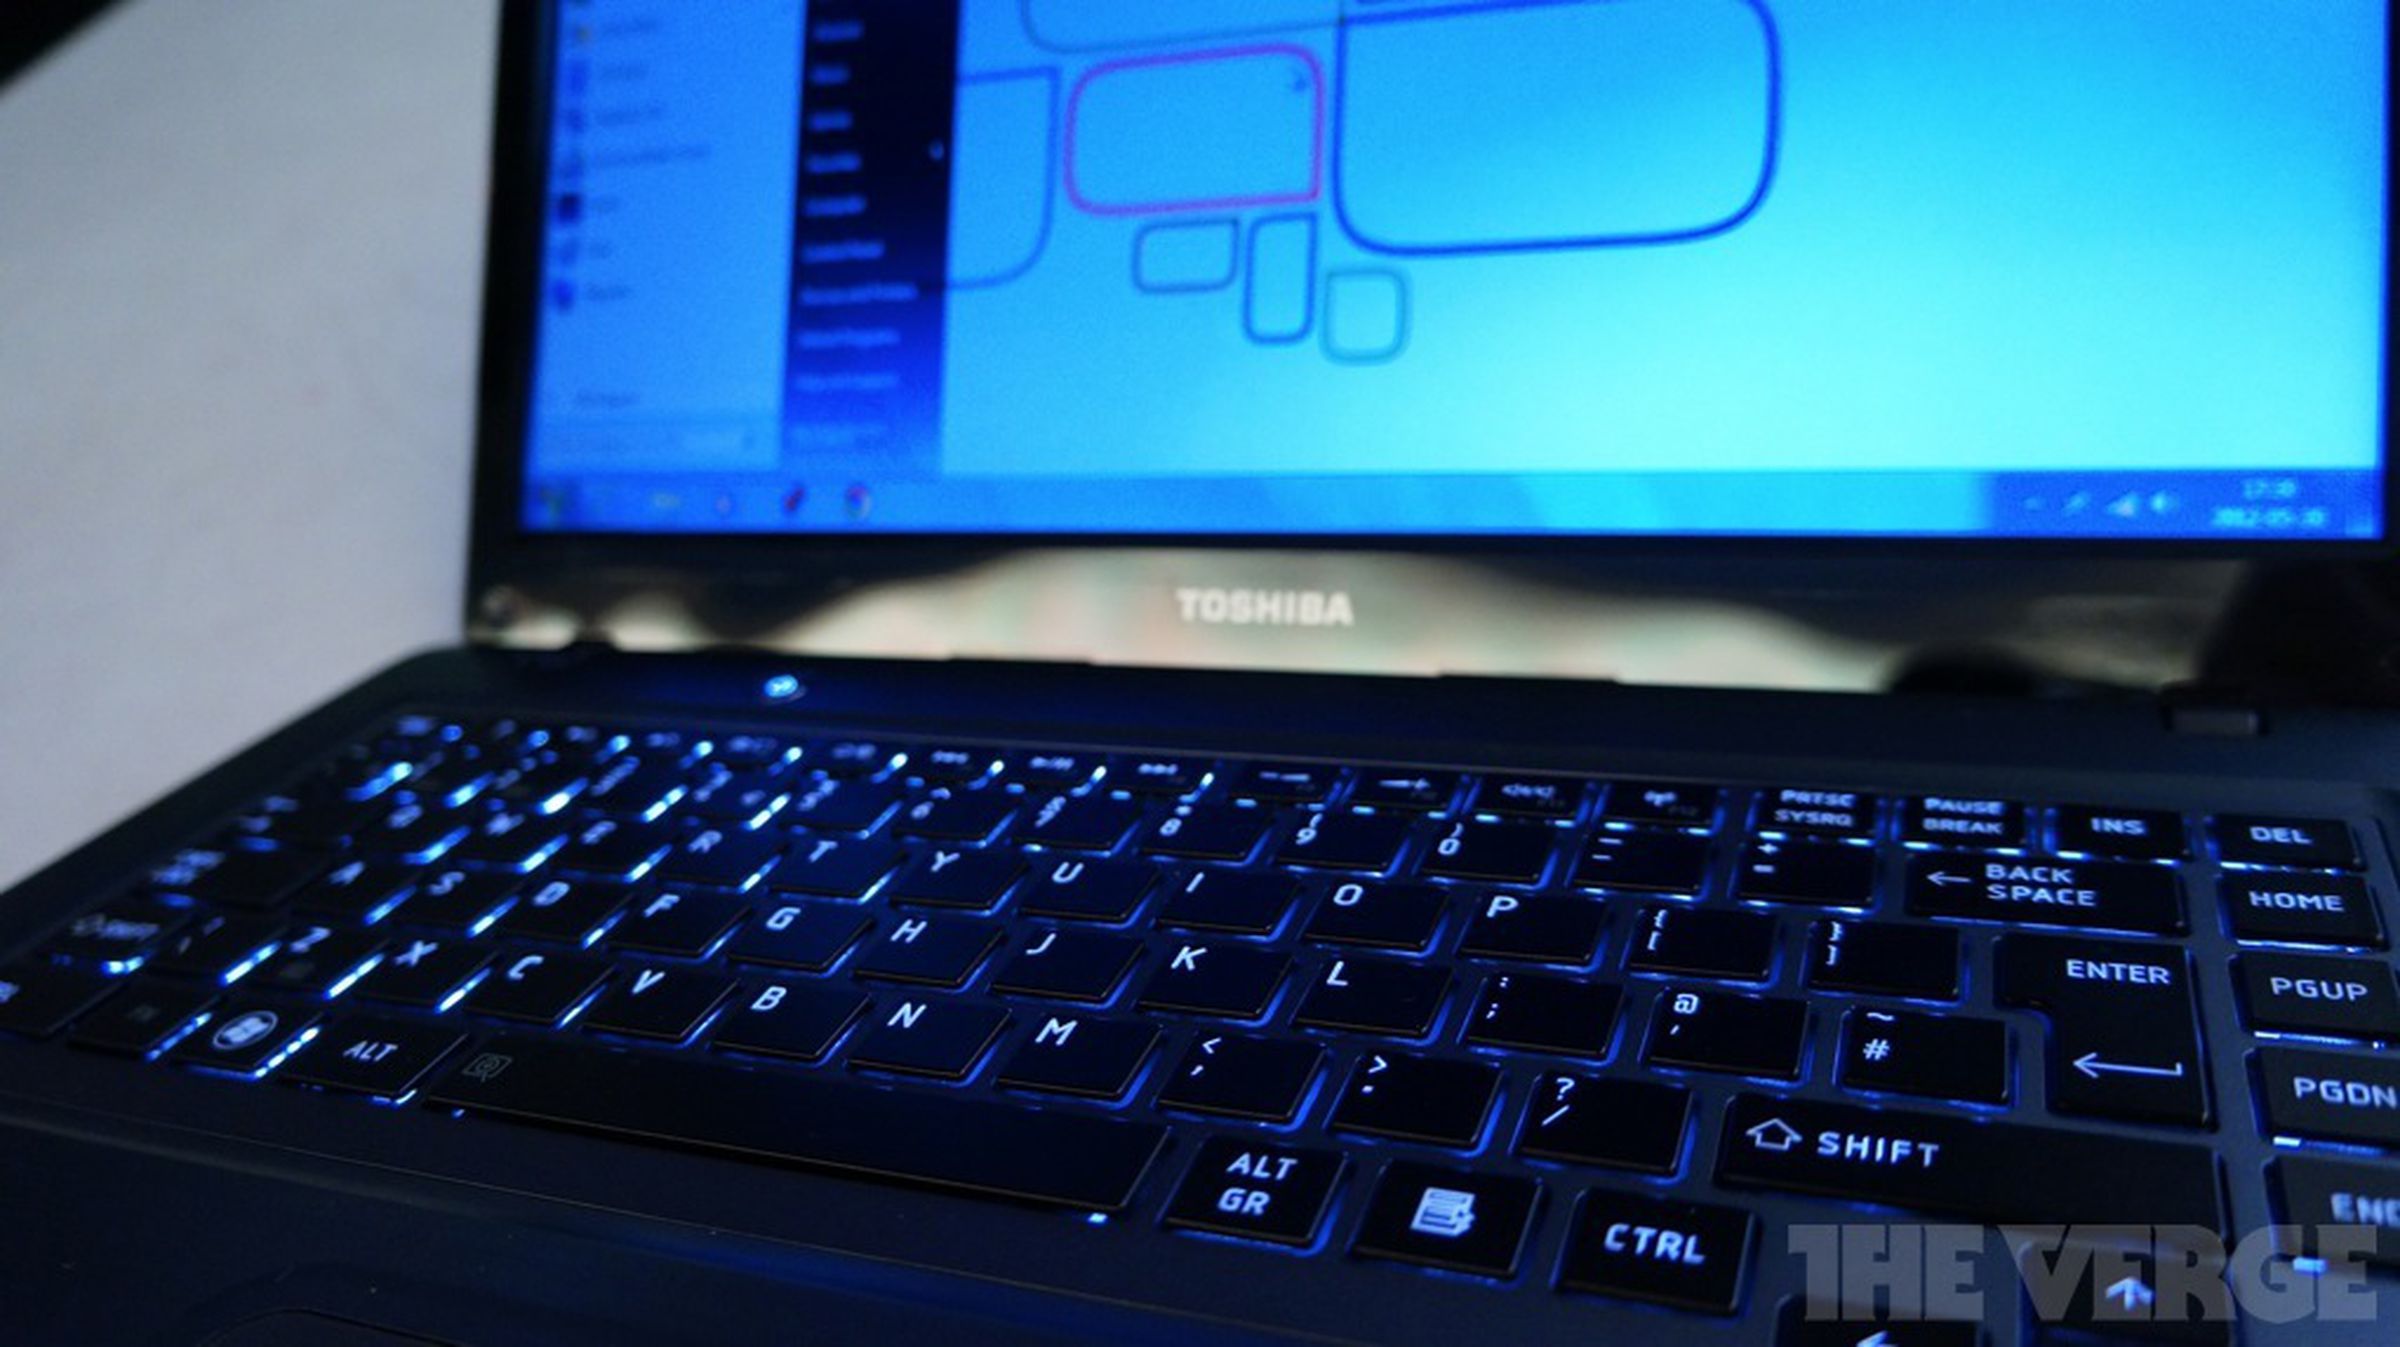 Toshiba Satellite U840 hands-on pictures